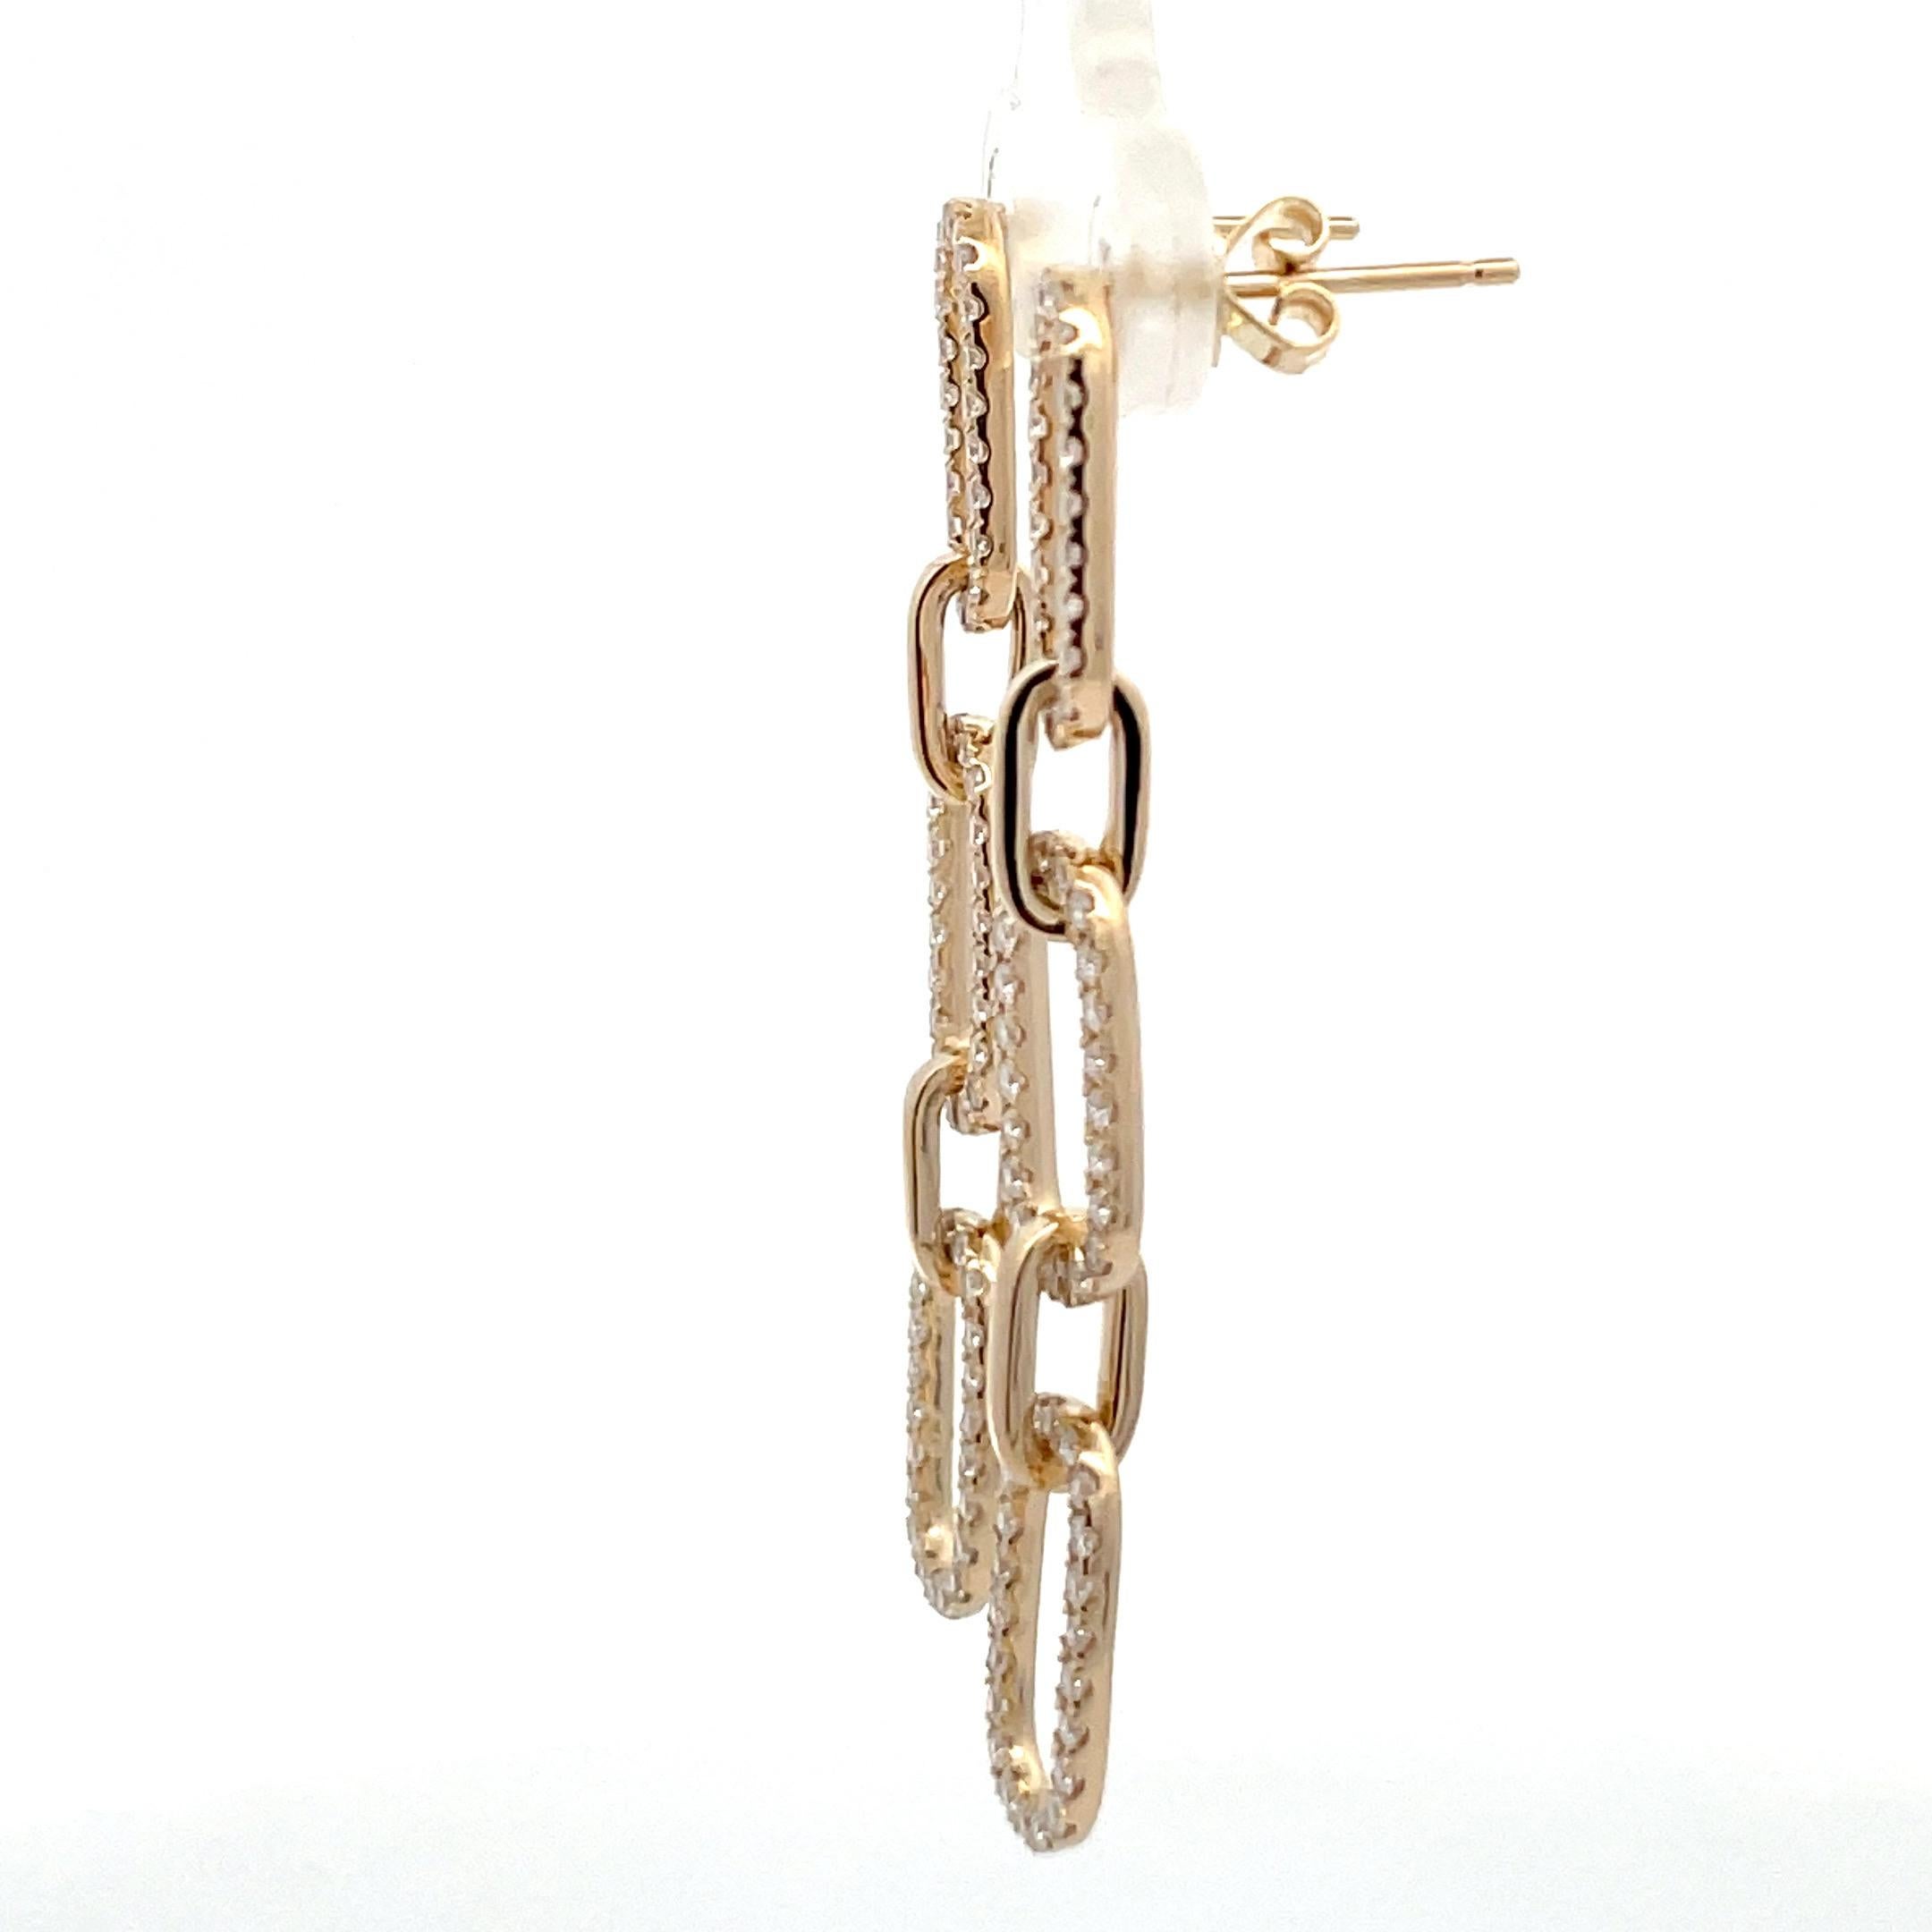 14 Karat yellow gold drop earrings featuring 132 round brilliance weighing 0.99 carats in a paper clip motif. Color G
Clarity SI